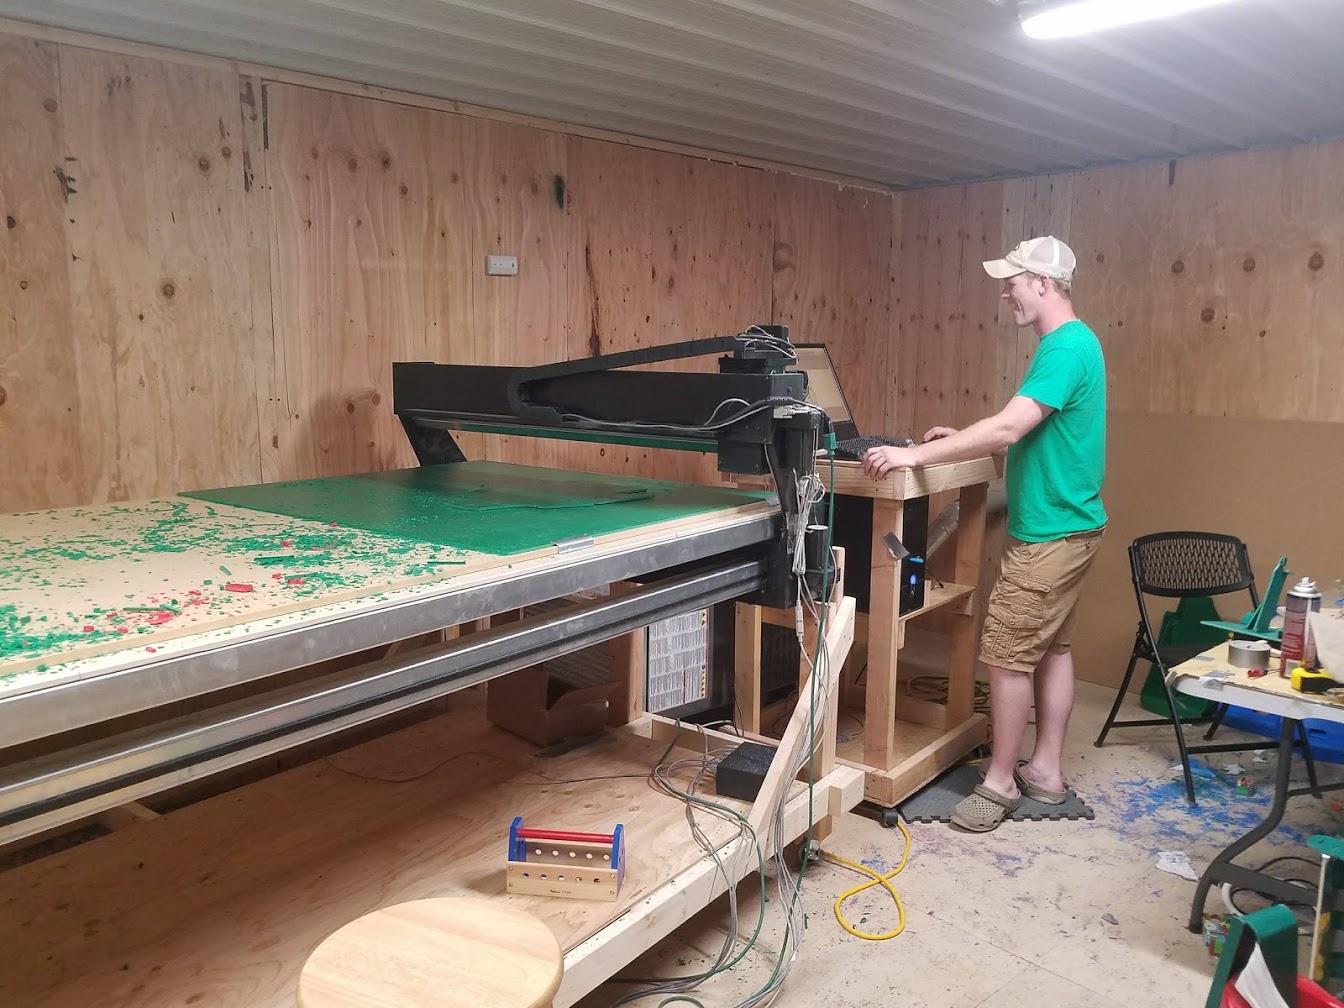 PHOTO: In September 2018, after lots of trial and error, "the Frog" was born. Taylor Moreland uses a CNC machines, or a Computer Numerical Control device, which generates prototypes from digital software files.